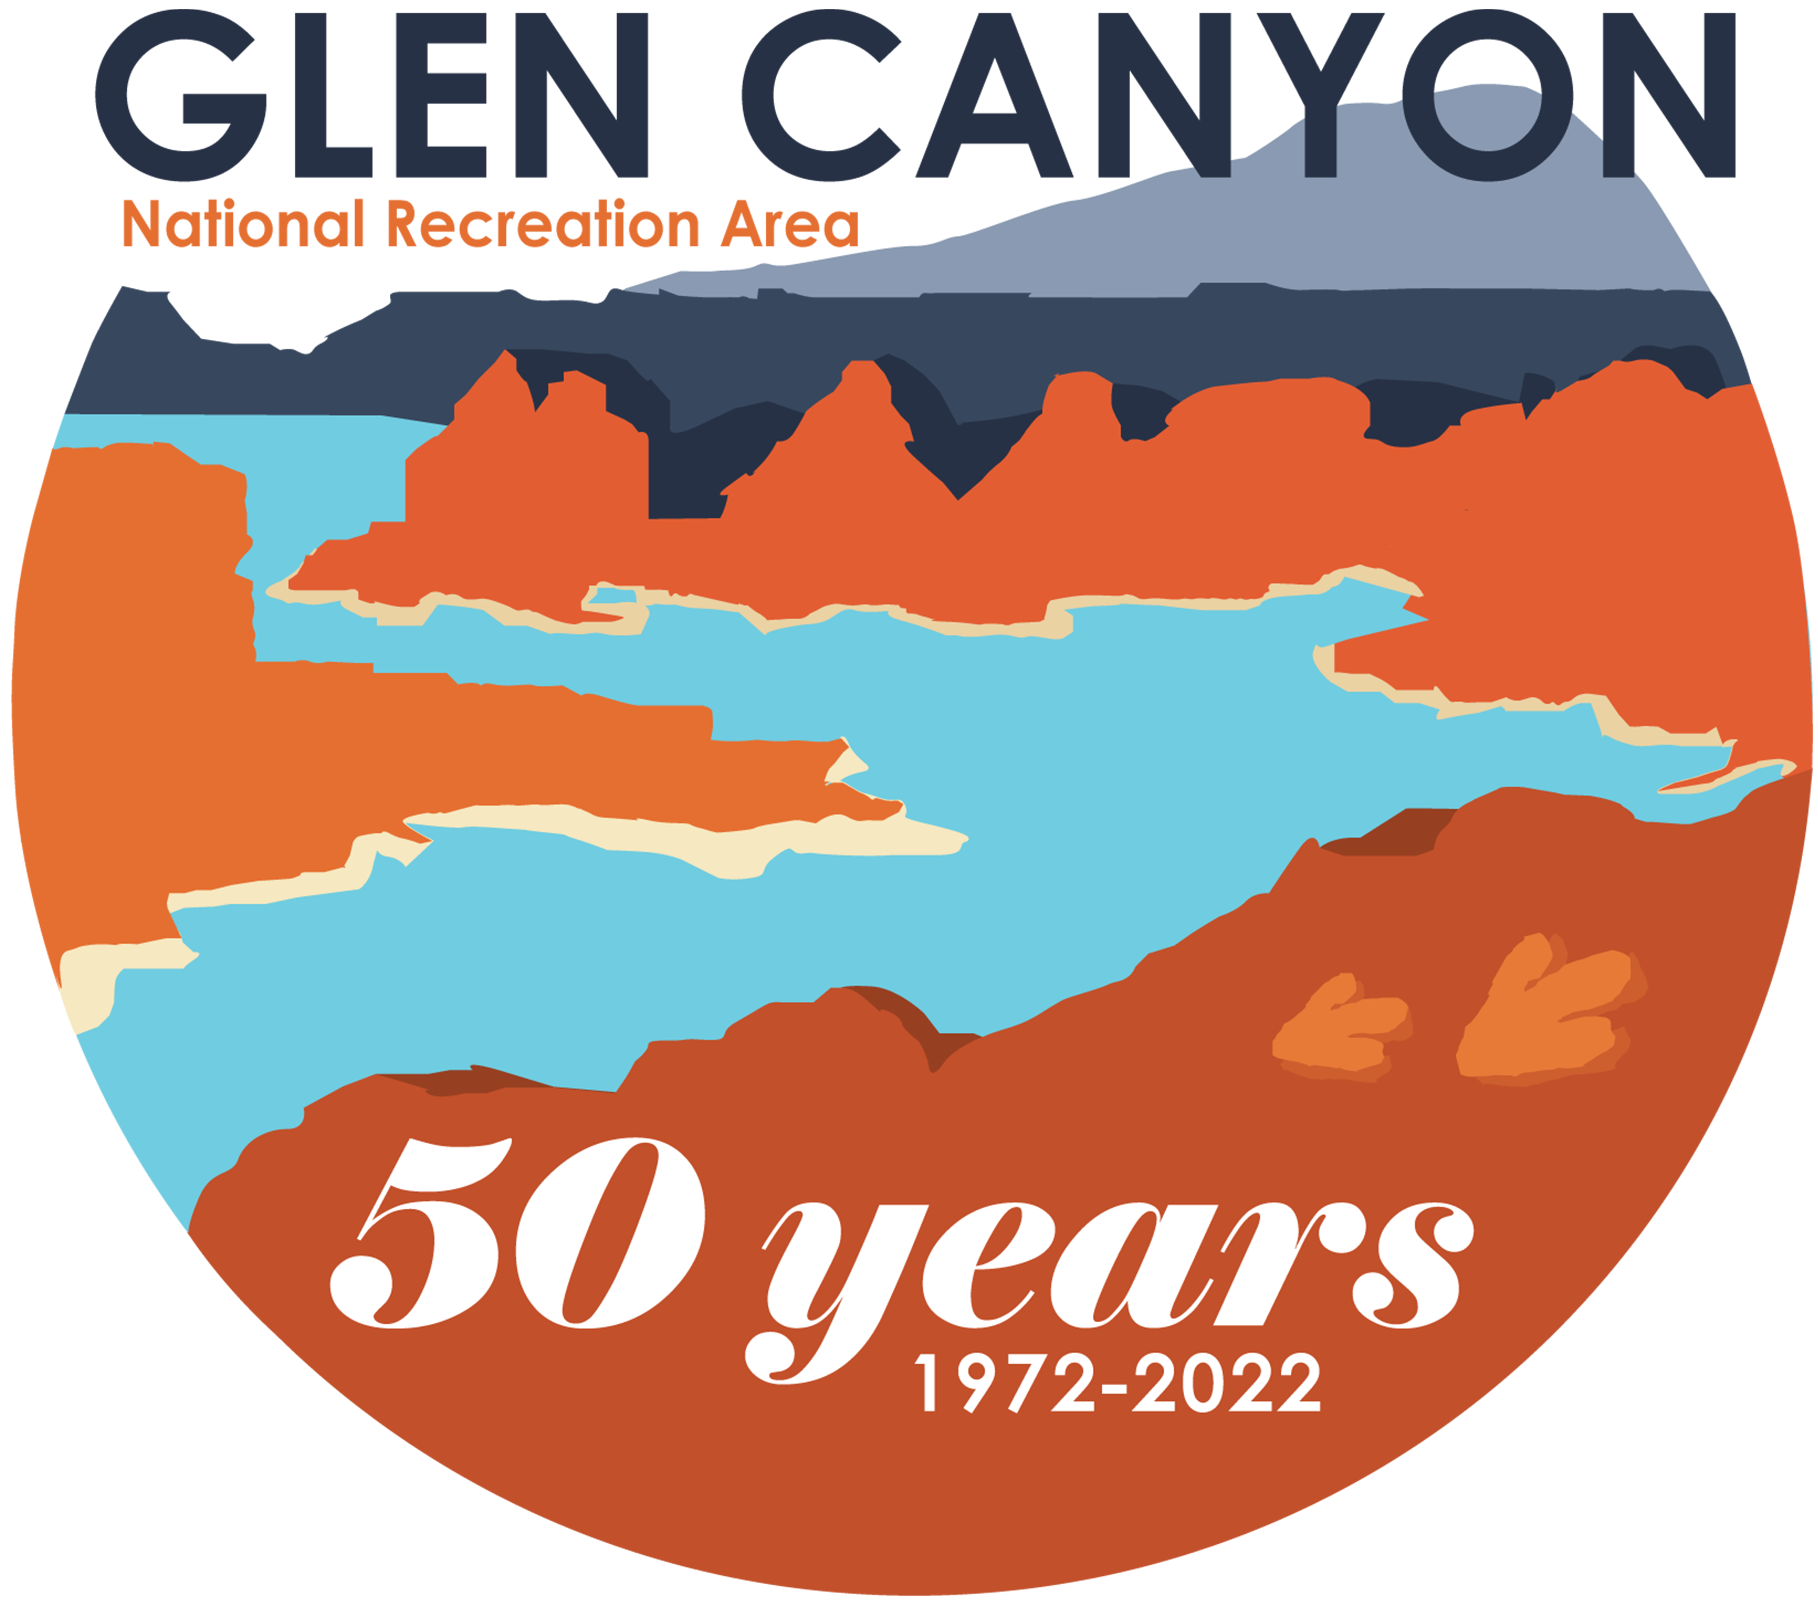 Glen Canyon National Recreation Area 50 Years 1972-2022 logo. Winding blue water between orange/red canyons. Purple mesas and a mountain in the background.